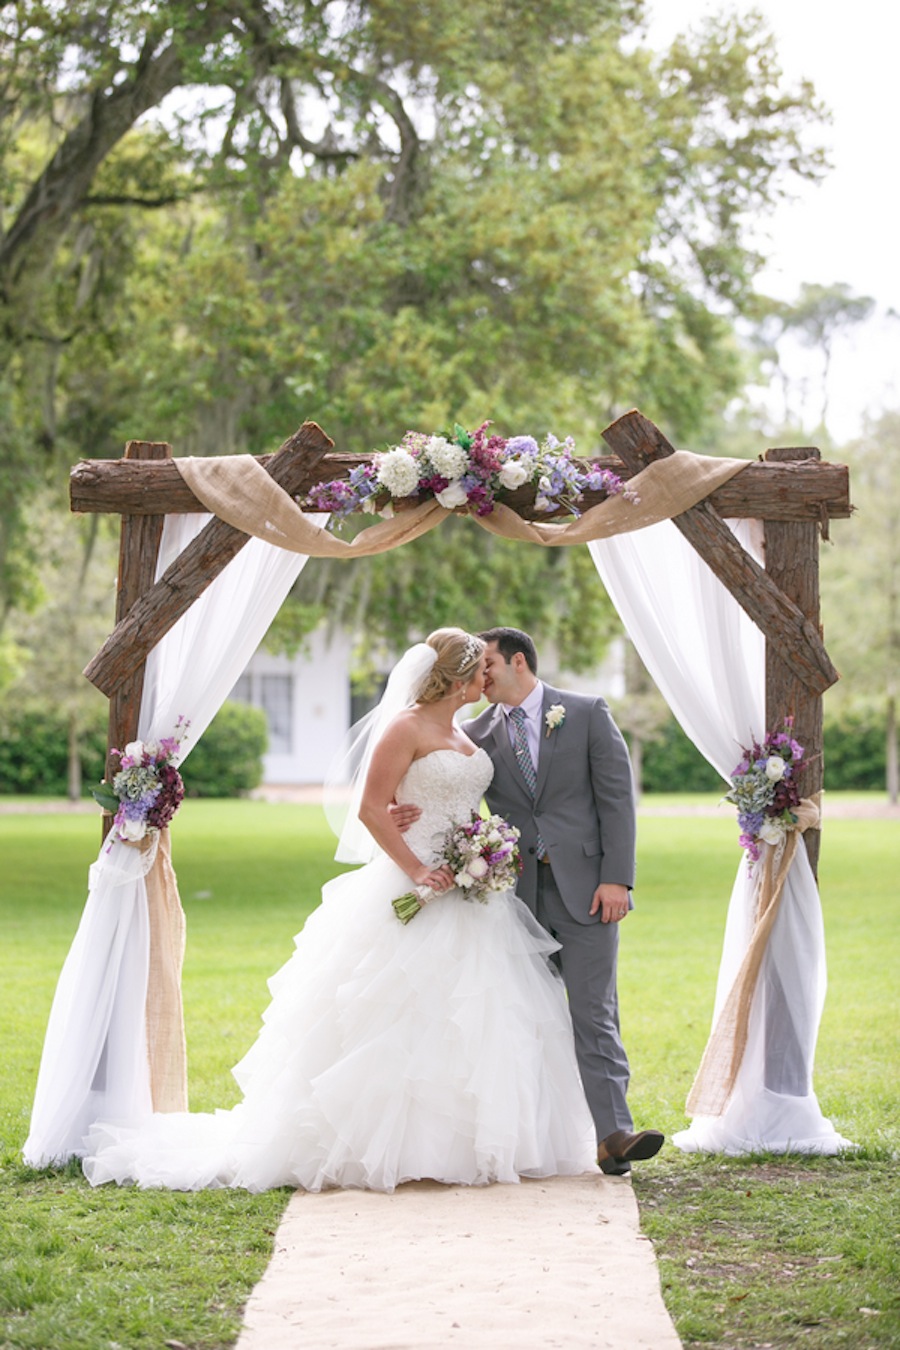 Rustic Bride and Groom Wedding Portrait | Tampa Wedding Photographer Carrie Wildes Photography | Rustic Bride and Groom Wedding Portrait | Tampa Wedding Photographer Carrie Wildes Photography | Oleg Cassini Wedding Dress